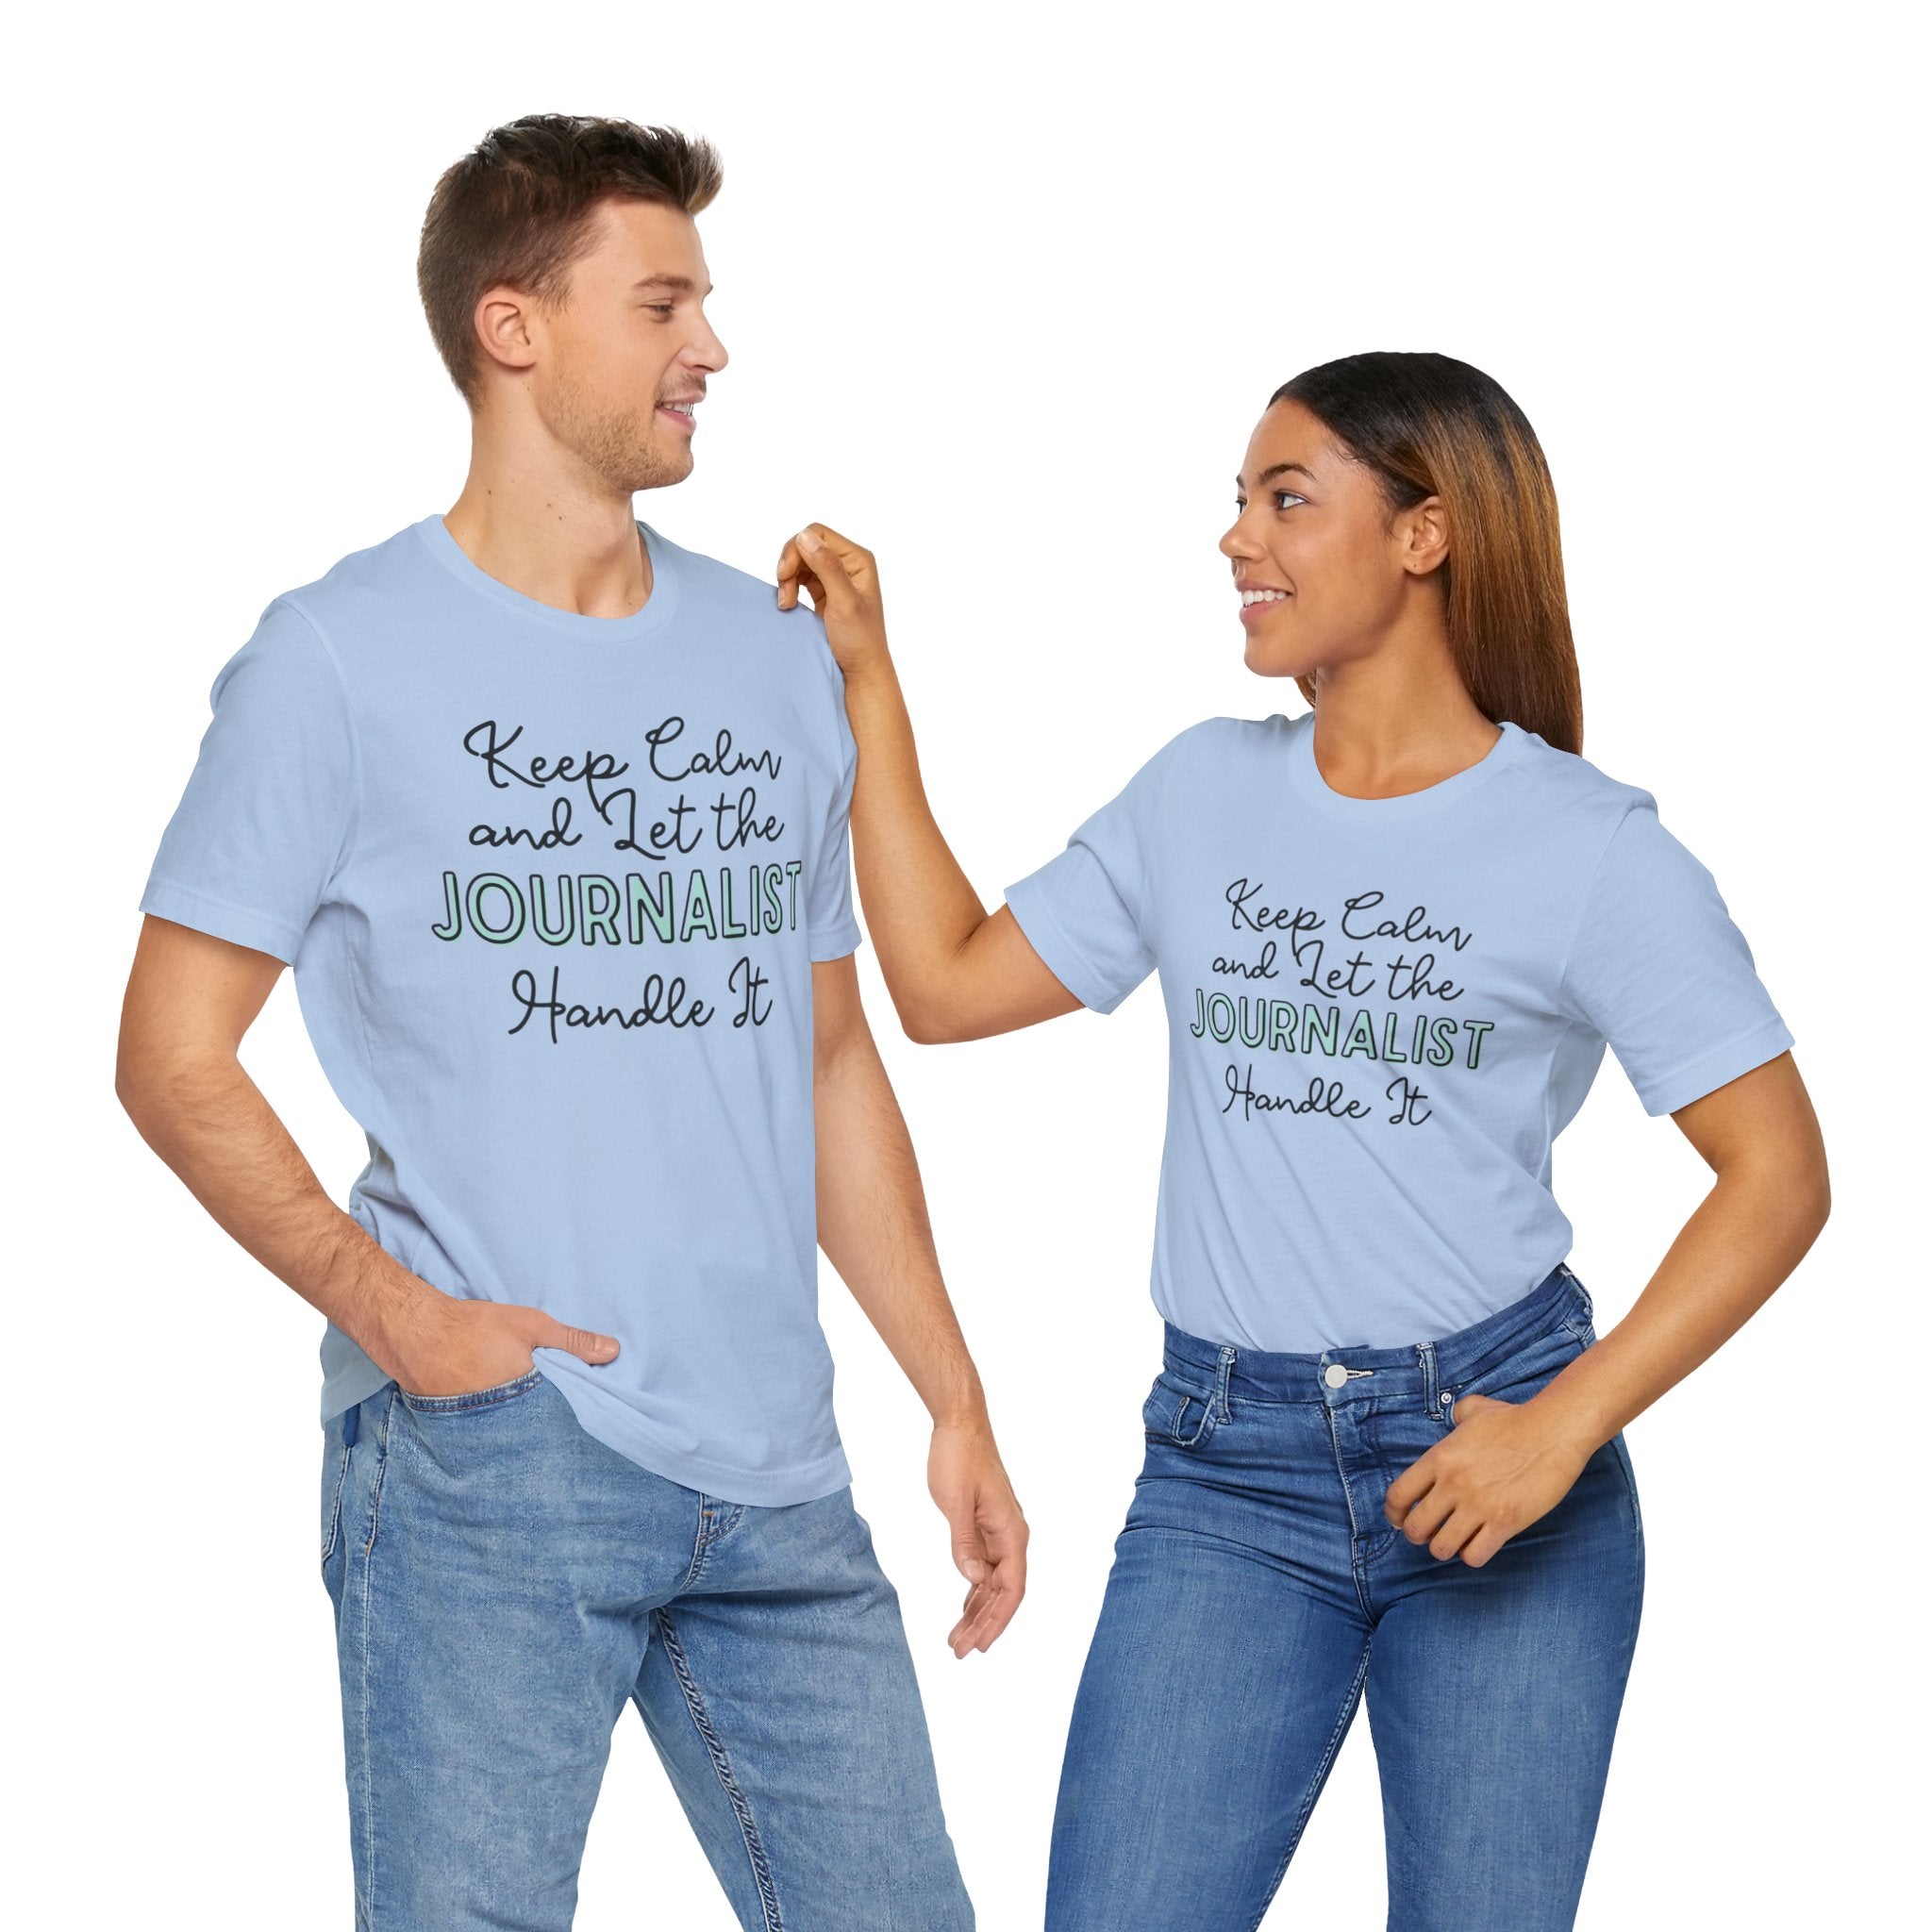 Keep Calm and let the Journalist handle It - Jersey Short Sleeve Tee